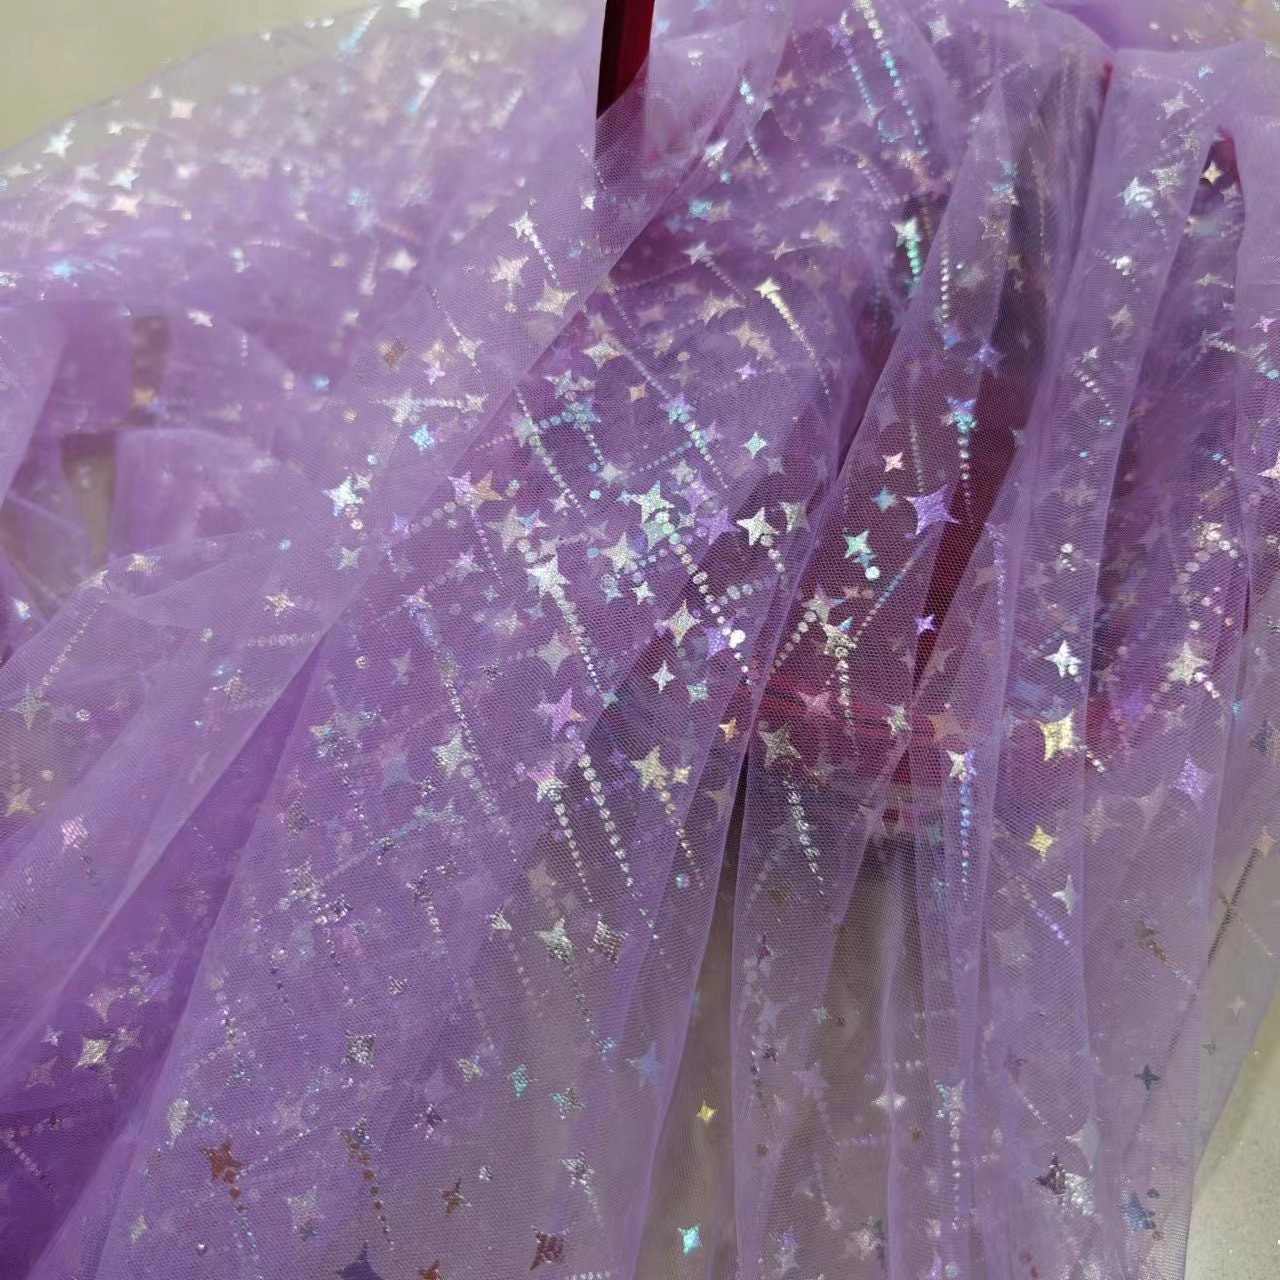 Colorful Stars Tulle Fabric, Sequin Mesh Lace Fabric, Pink Tulle Lace,  Bridal Veil Tutu Dress Skirt Fabric Sell by the Yard 